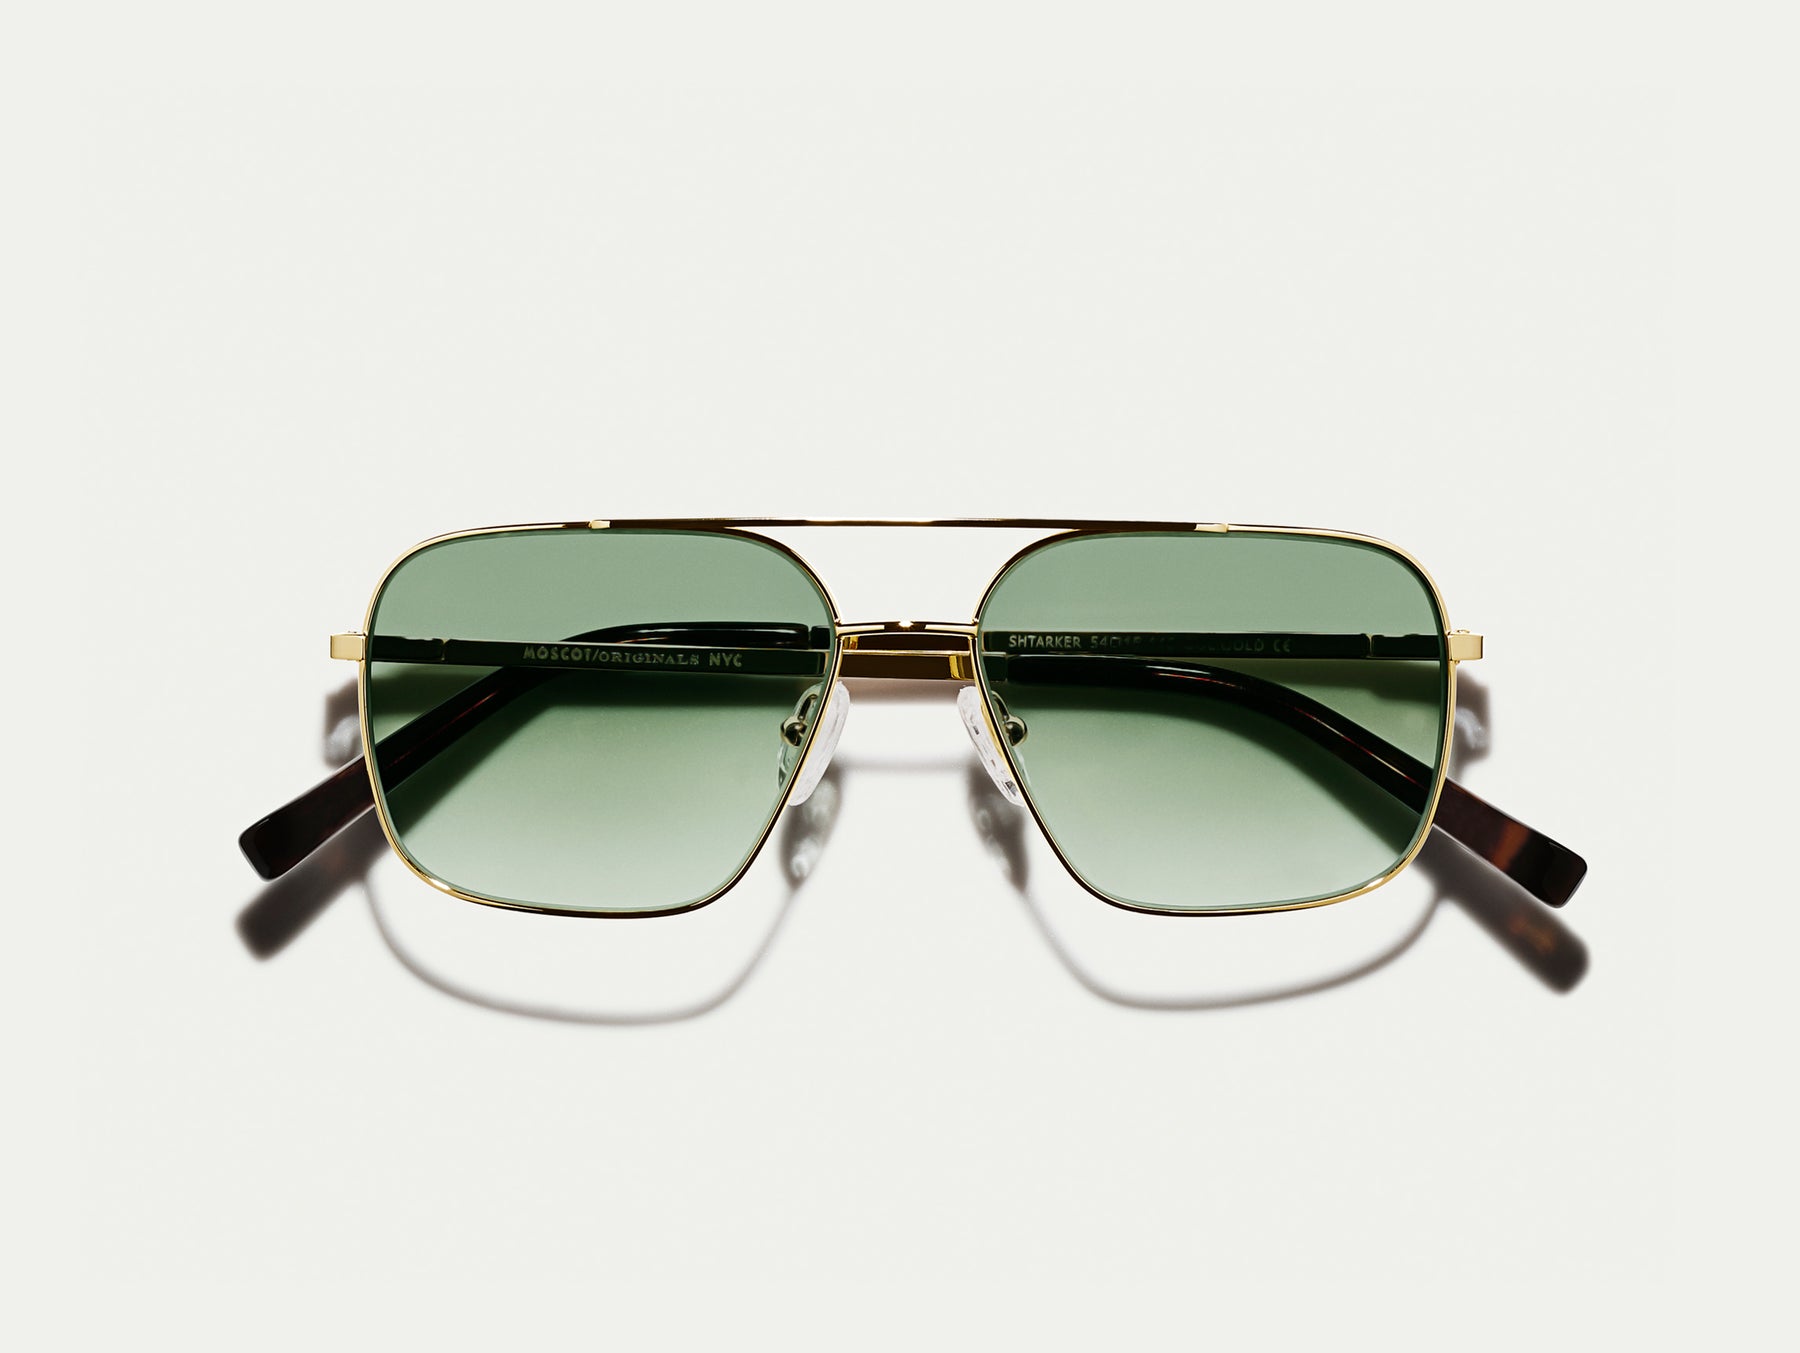 The SHTARKER in Gold with G-15 Fade Tinted Lenses